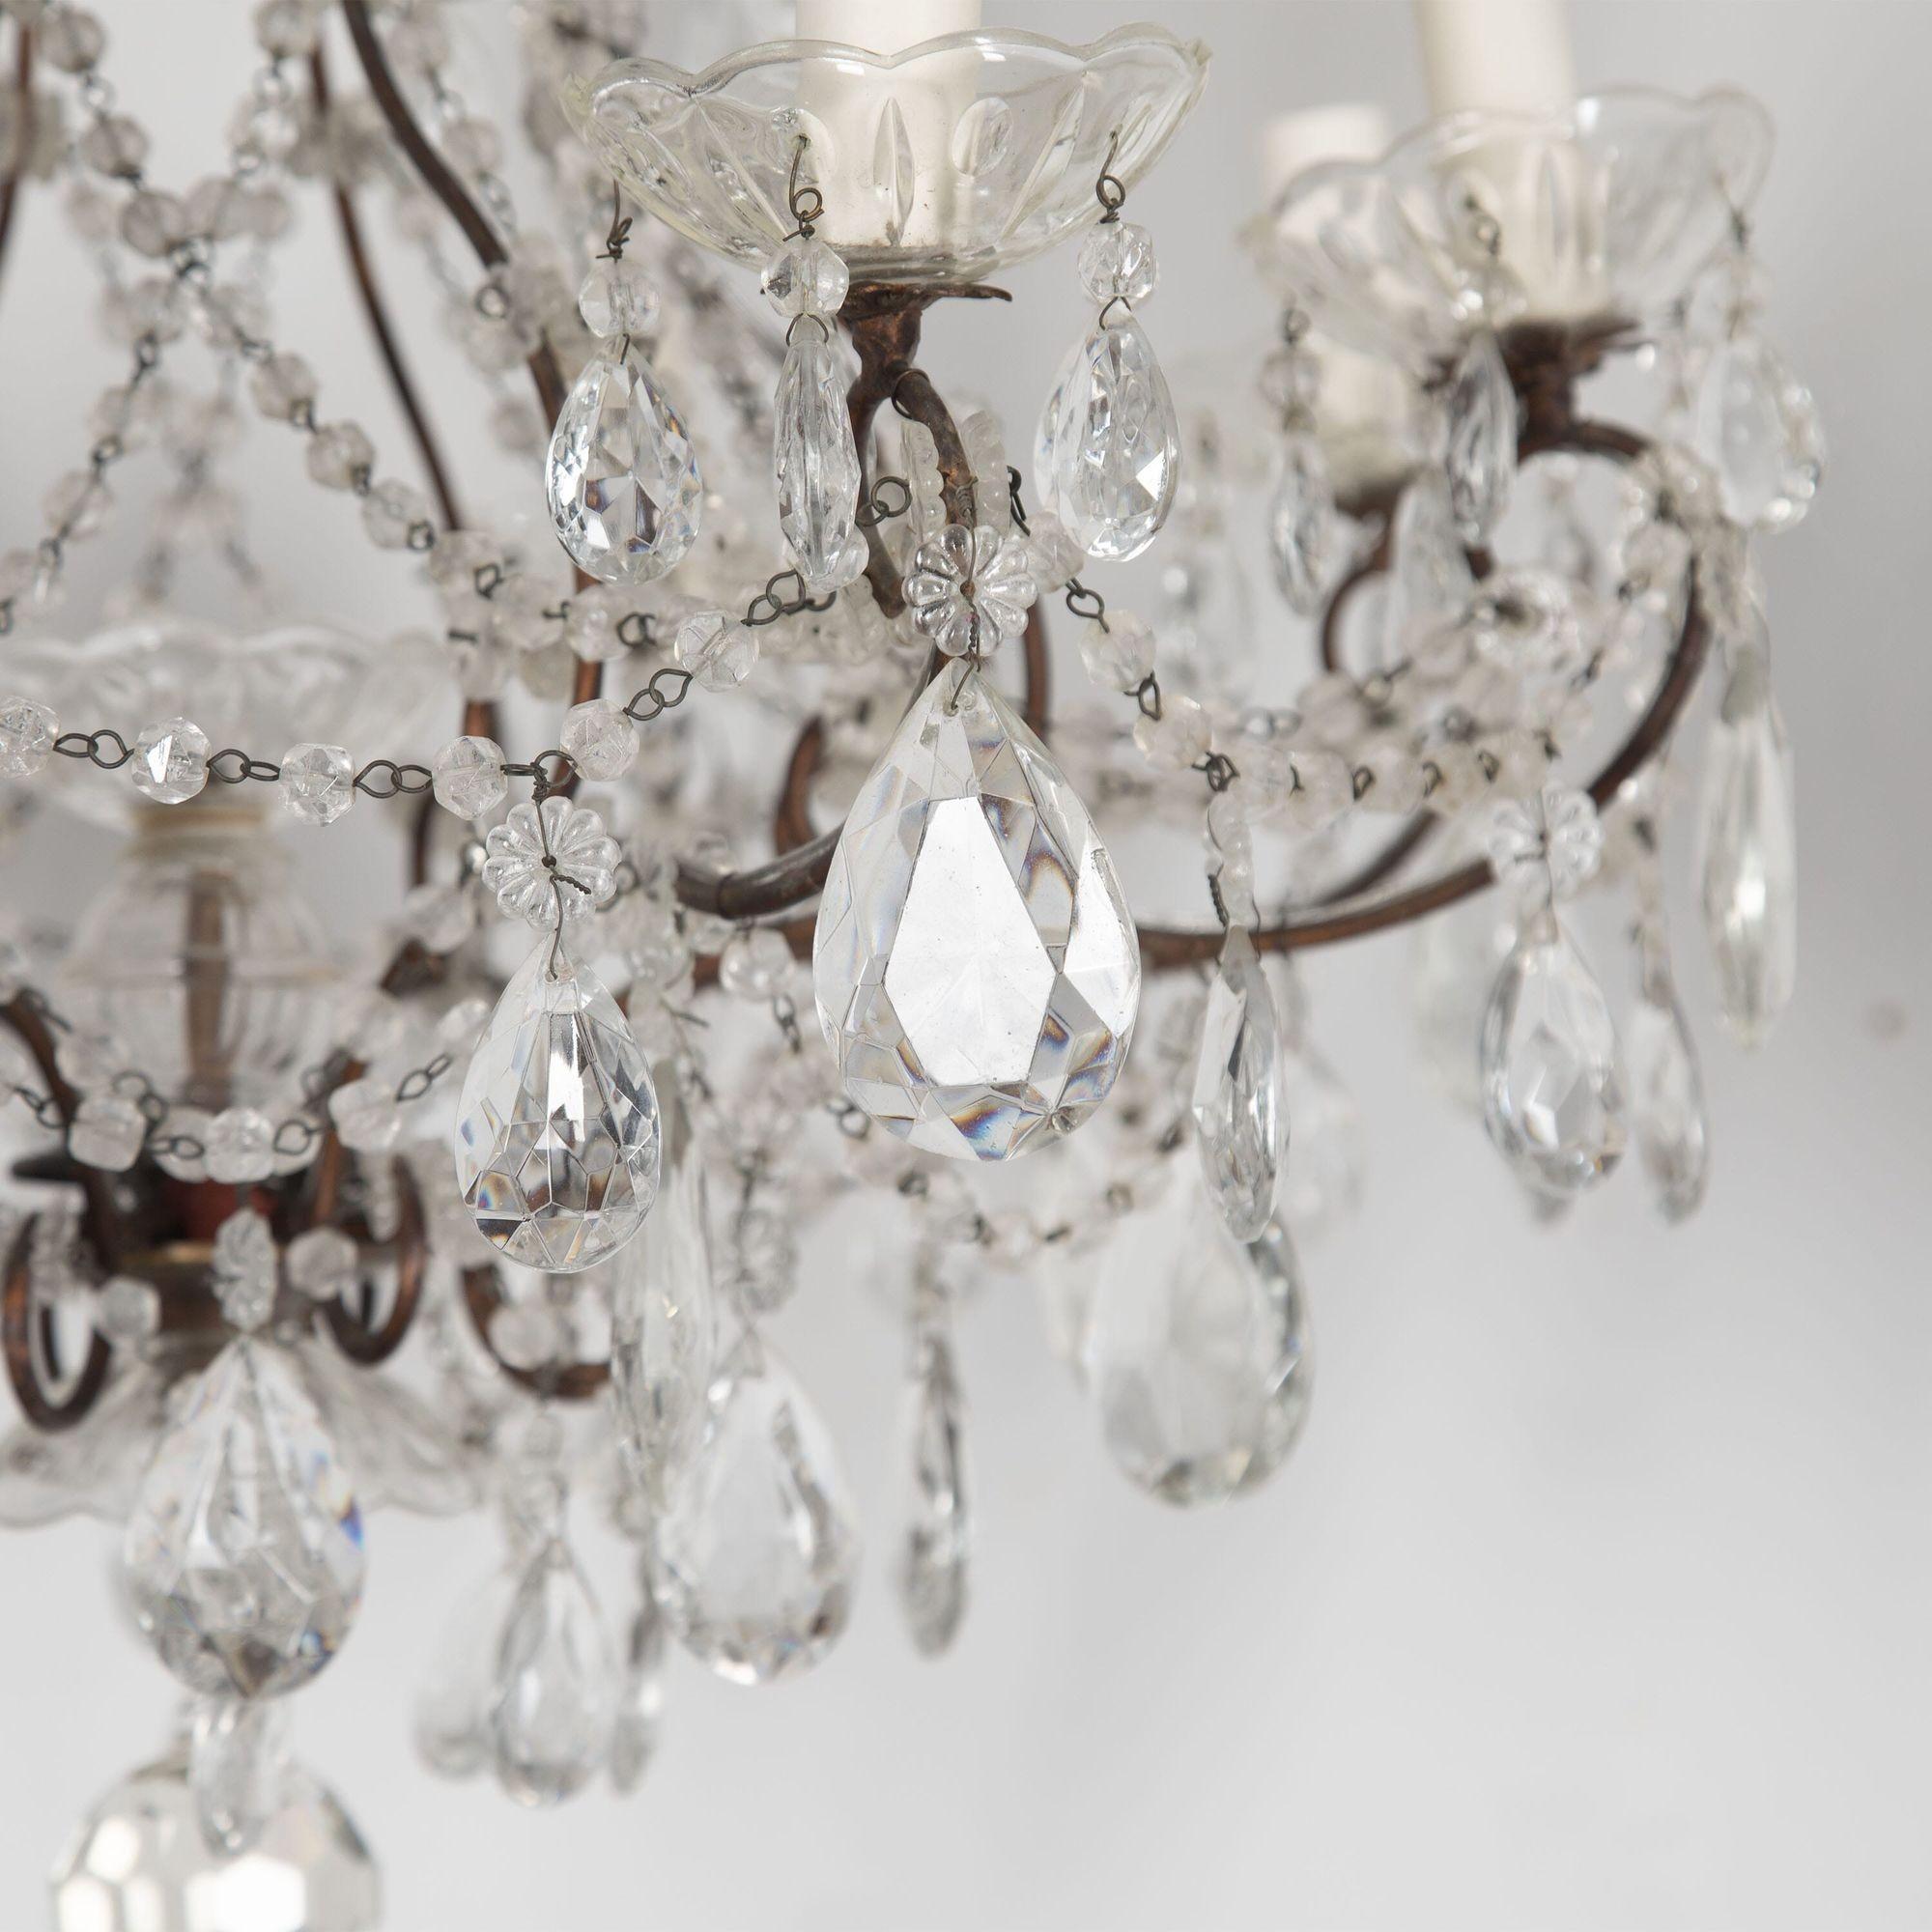 Pair of 20th Century Italian chandeliers with bronzed metal frame and glass drops.
These chandeliers have been rewired to current UK standards.